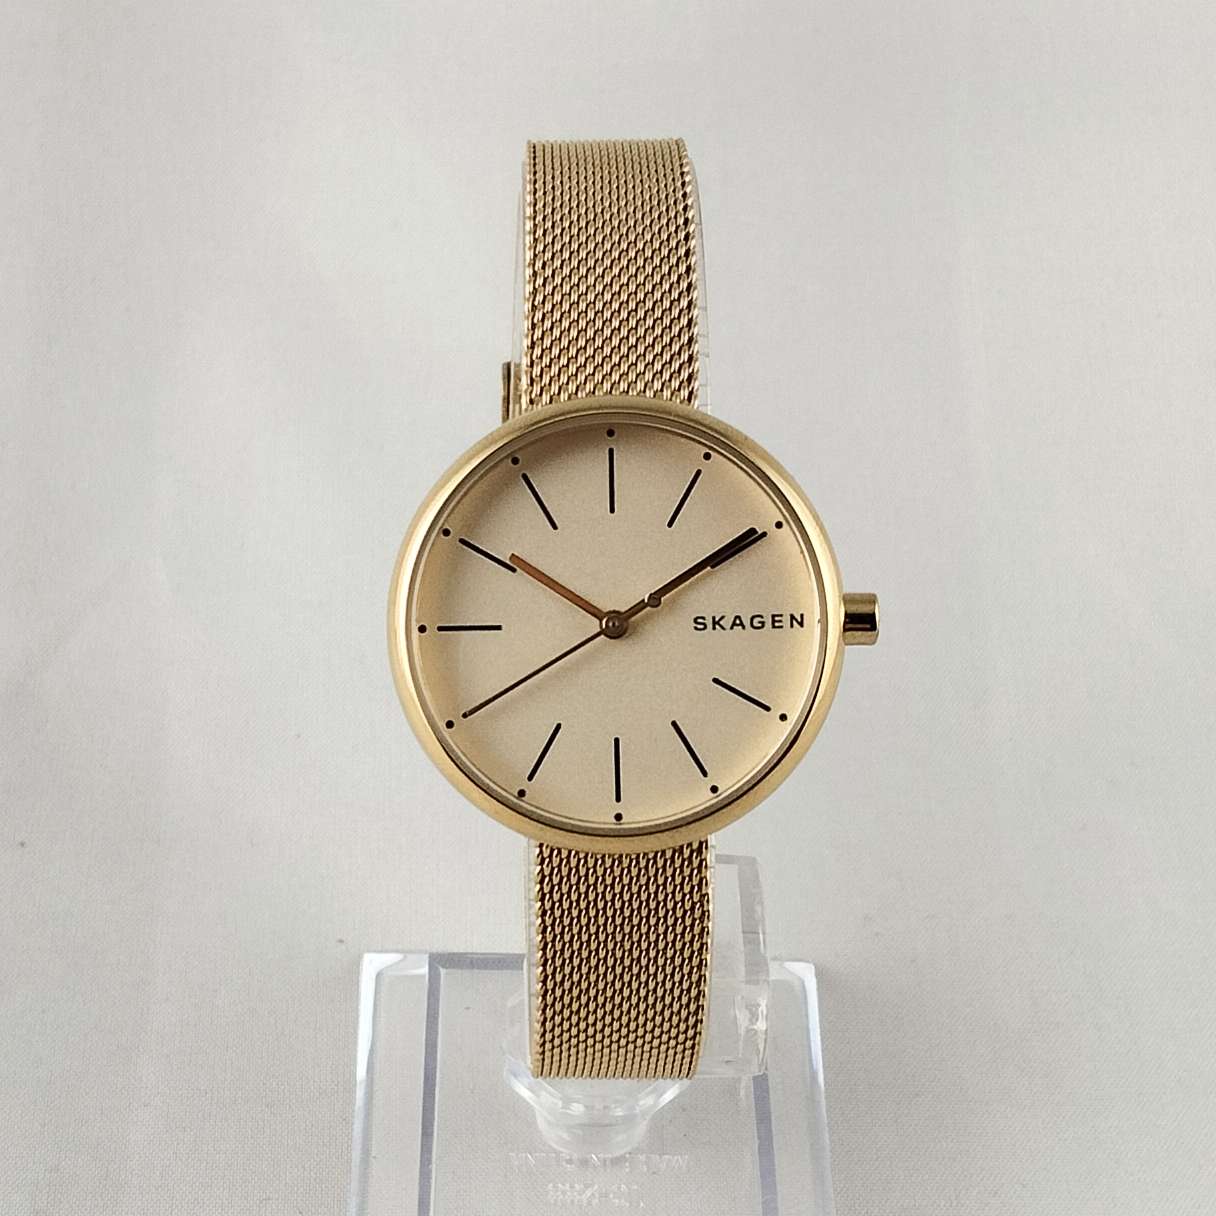 Skagen Unisex Gold Tone Watch, Bold Face and Thin Mesh Strap